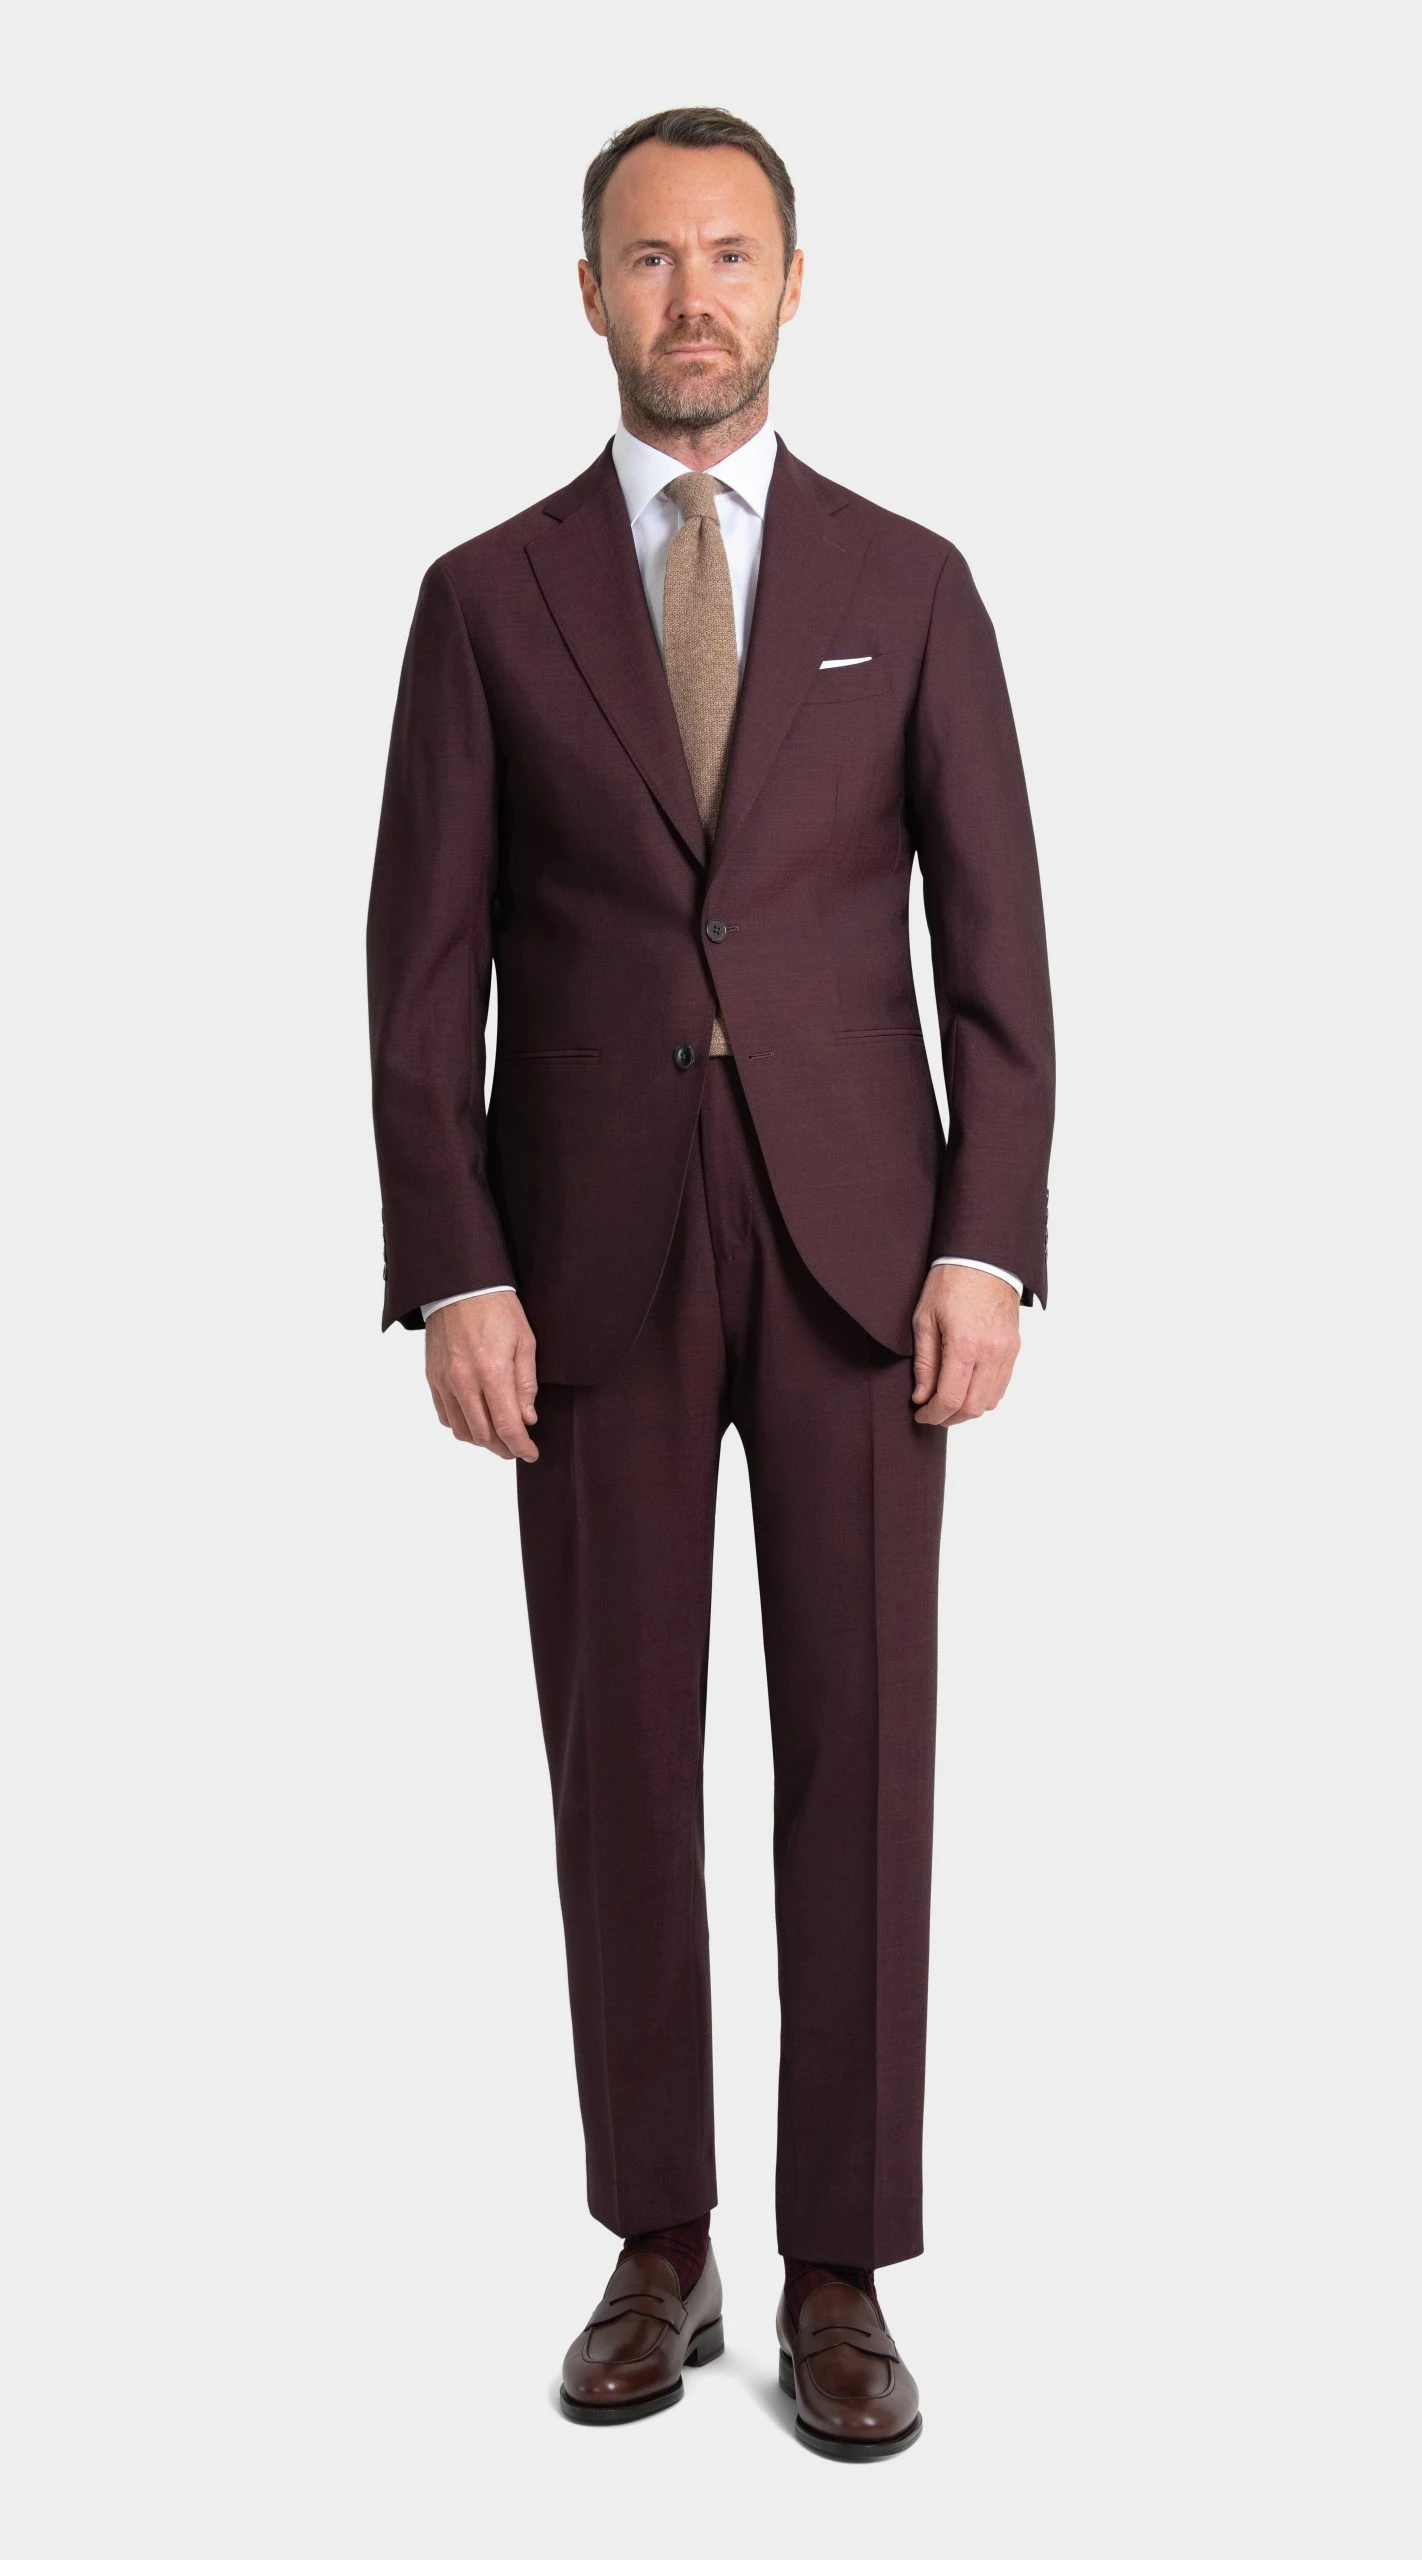 NEW burgundy suit in twistair fabric